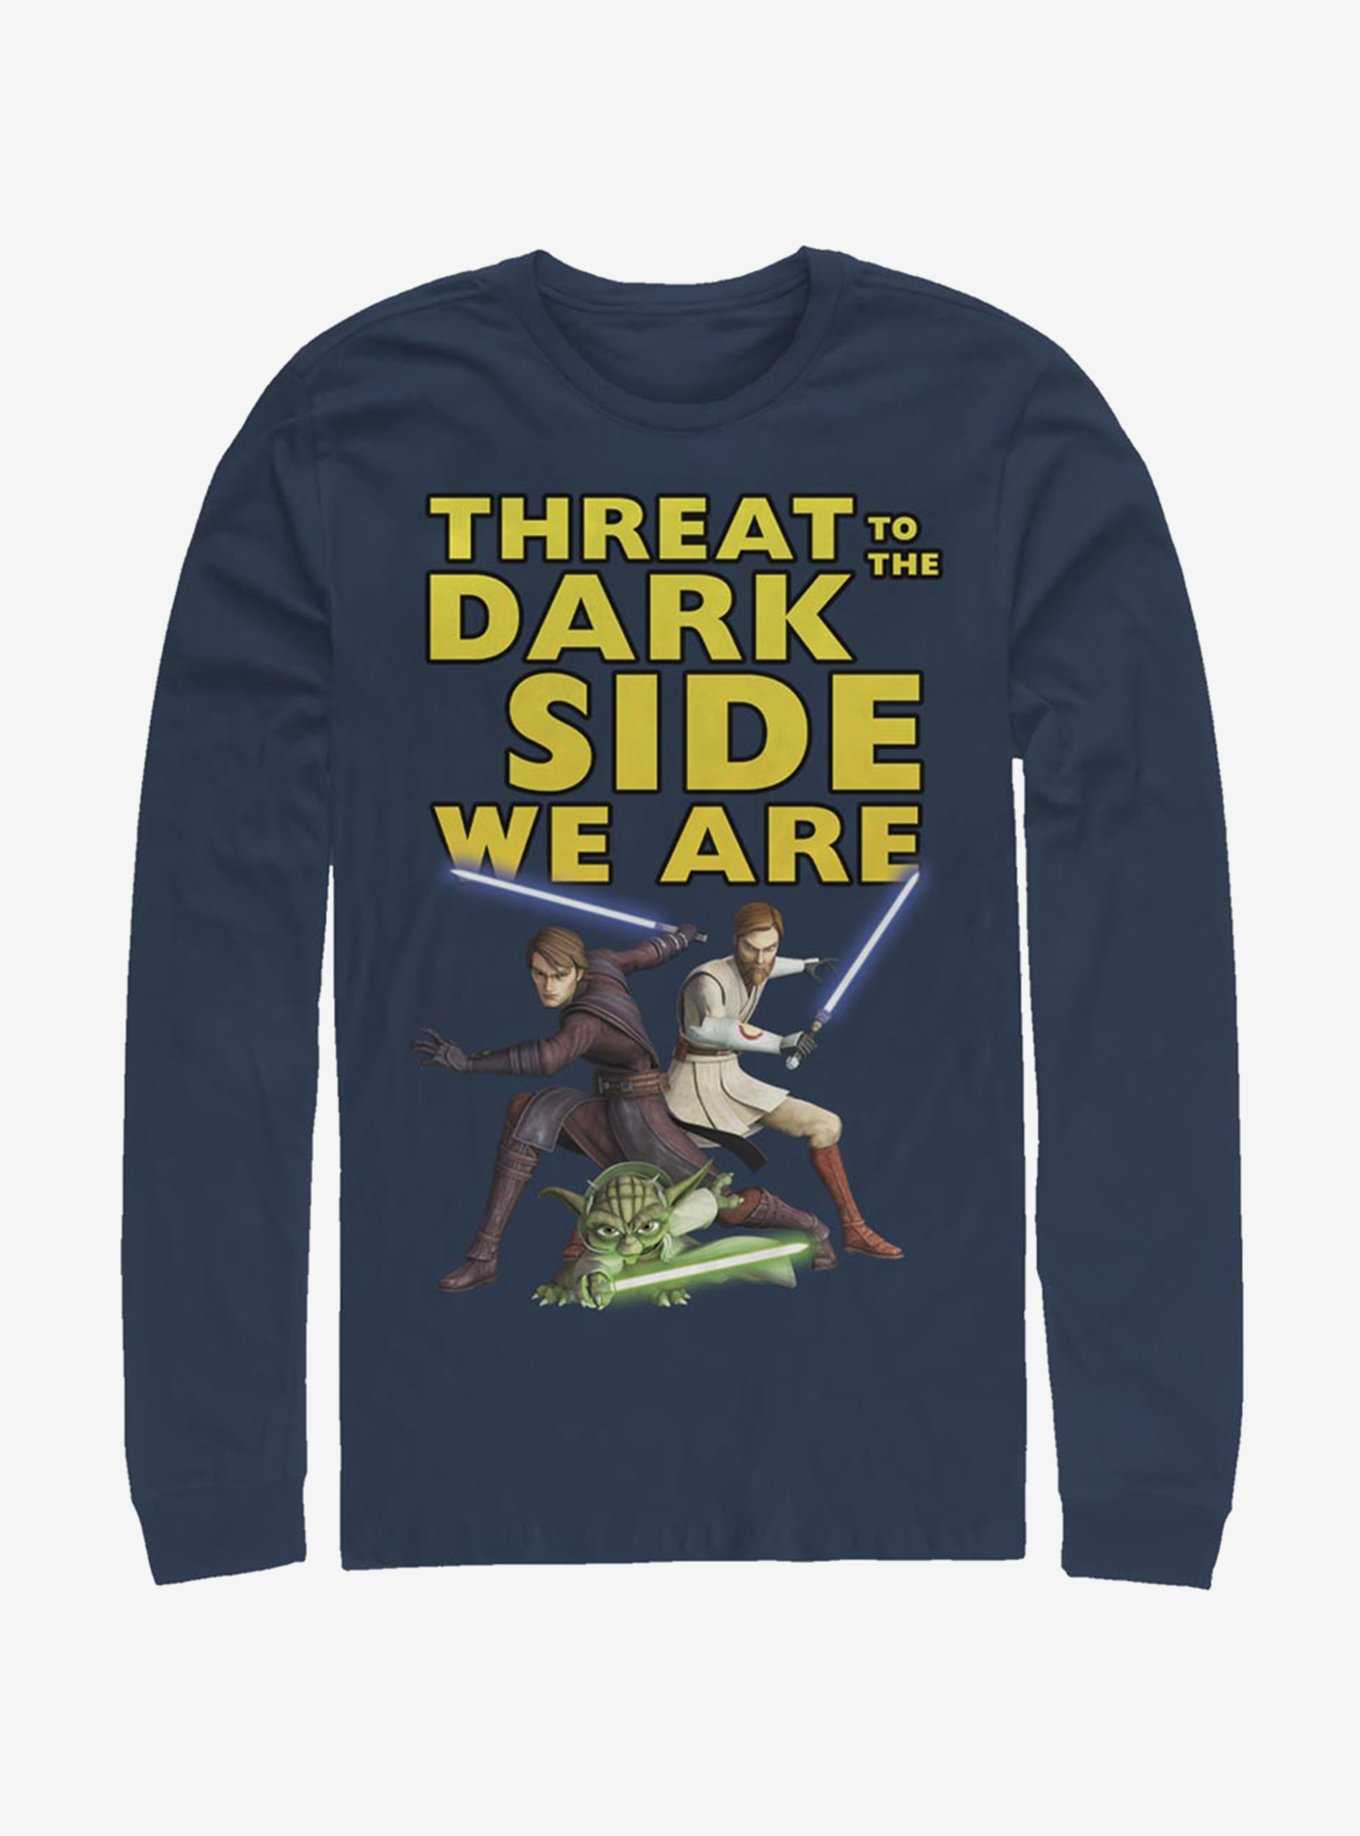 Star Wars The Clone Wars Threat We Are Long-Sleeve T-Shirt, , hi-res